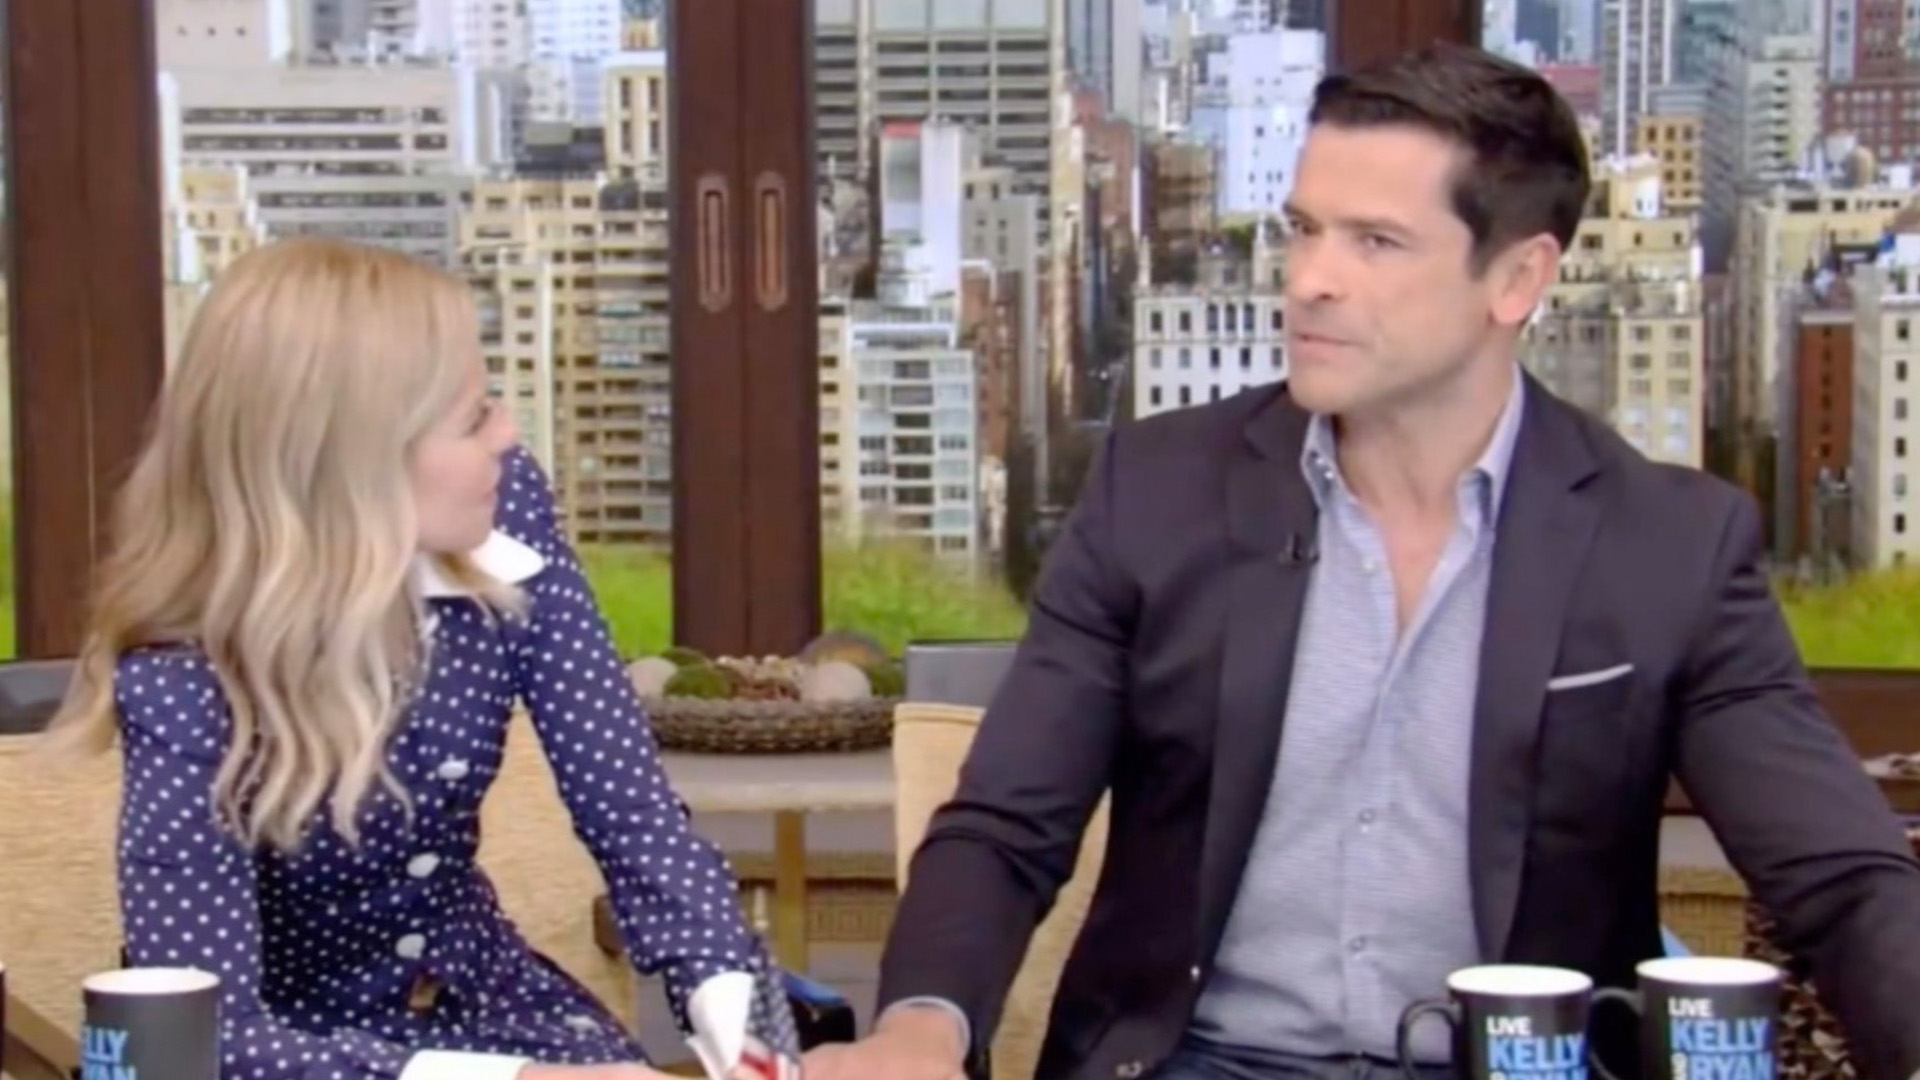 Kelly Ripa and Mark Consuelos, husband and wife, show major PDA during Ryan Seacrest’s absence on Live.